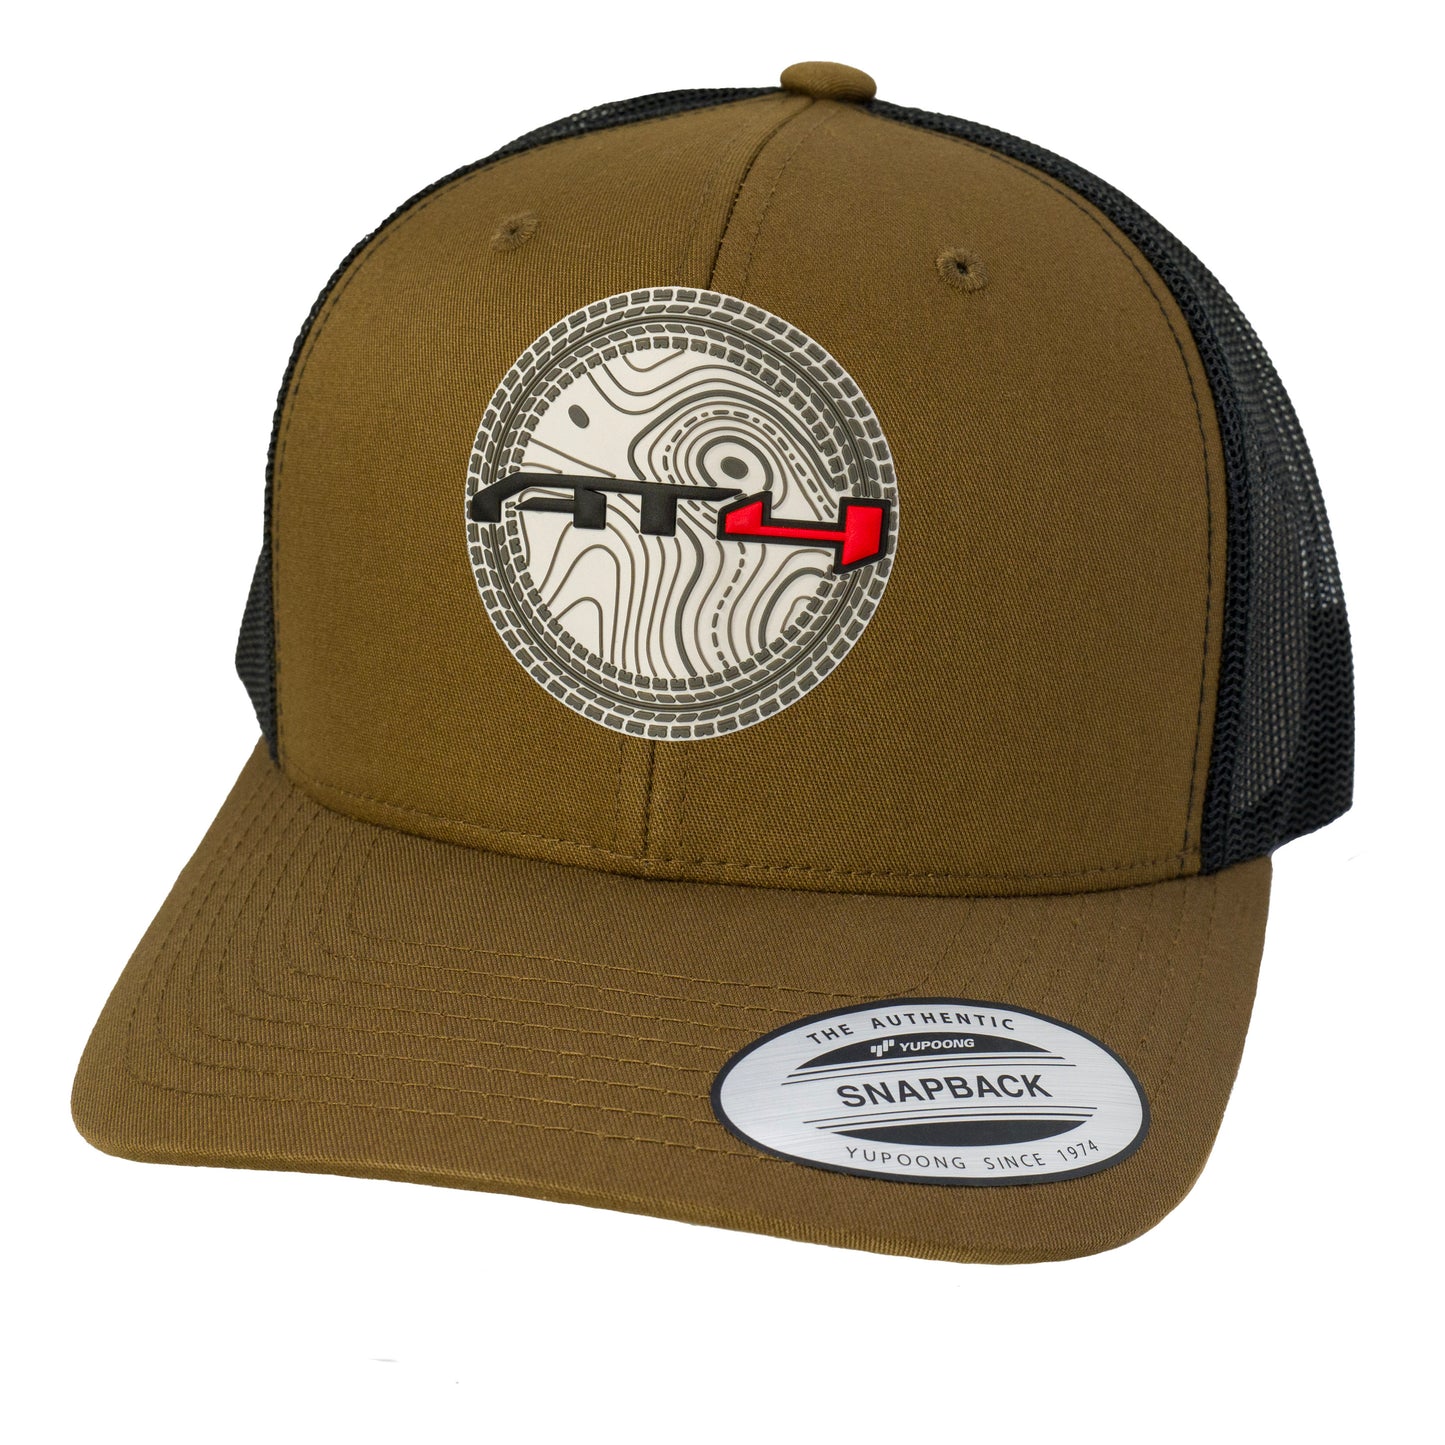 AT4 3D YP Snapback Trucker Hat- Coyote Brown/ Black - Ten Gallon Hat Co.